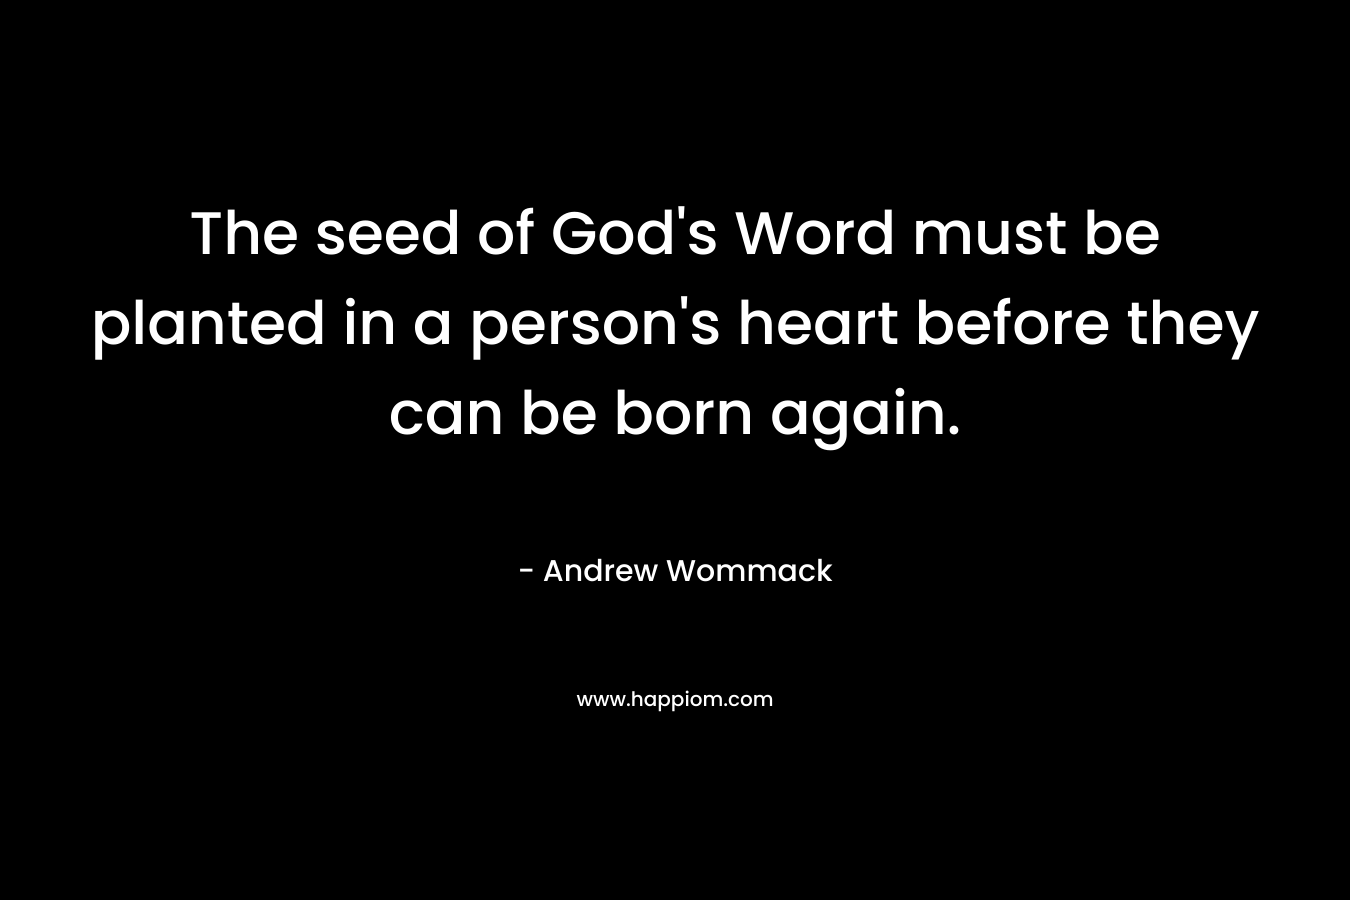 The seed of God's Word must be planted in a person's heart before they can be born again.